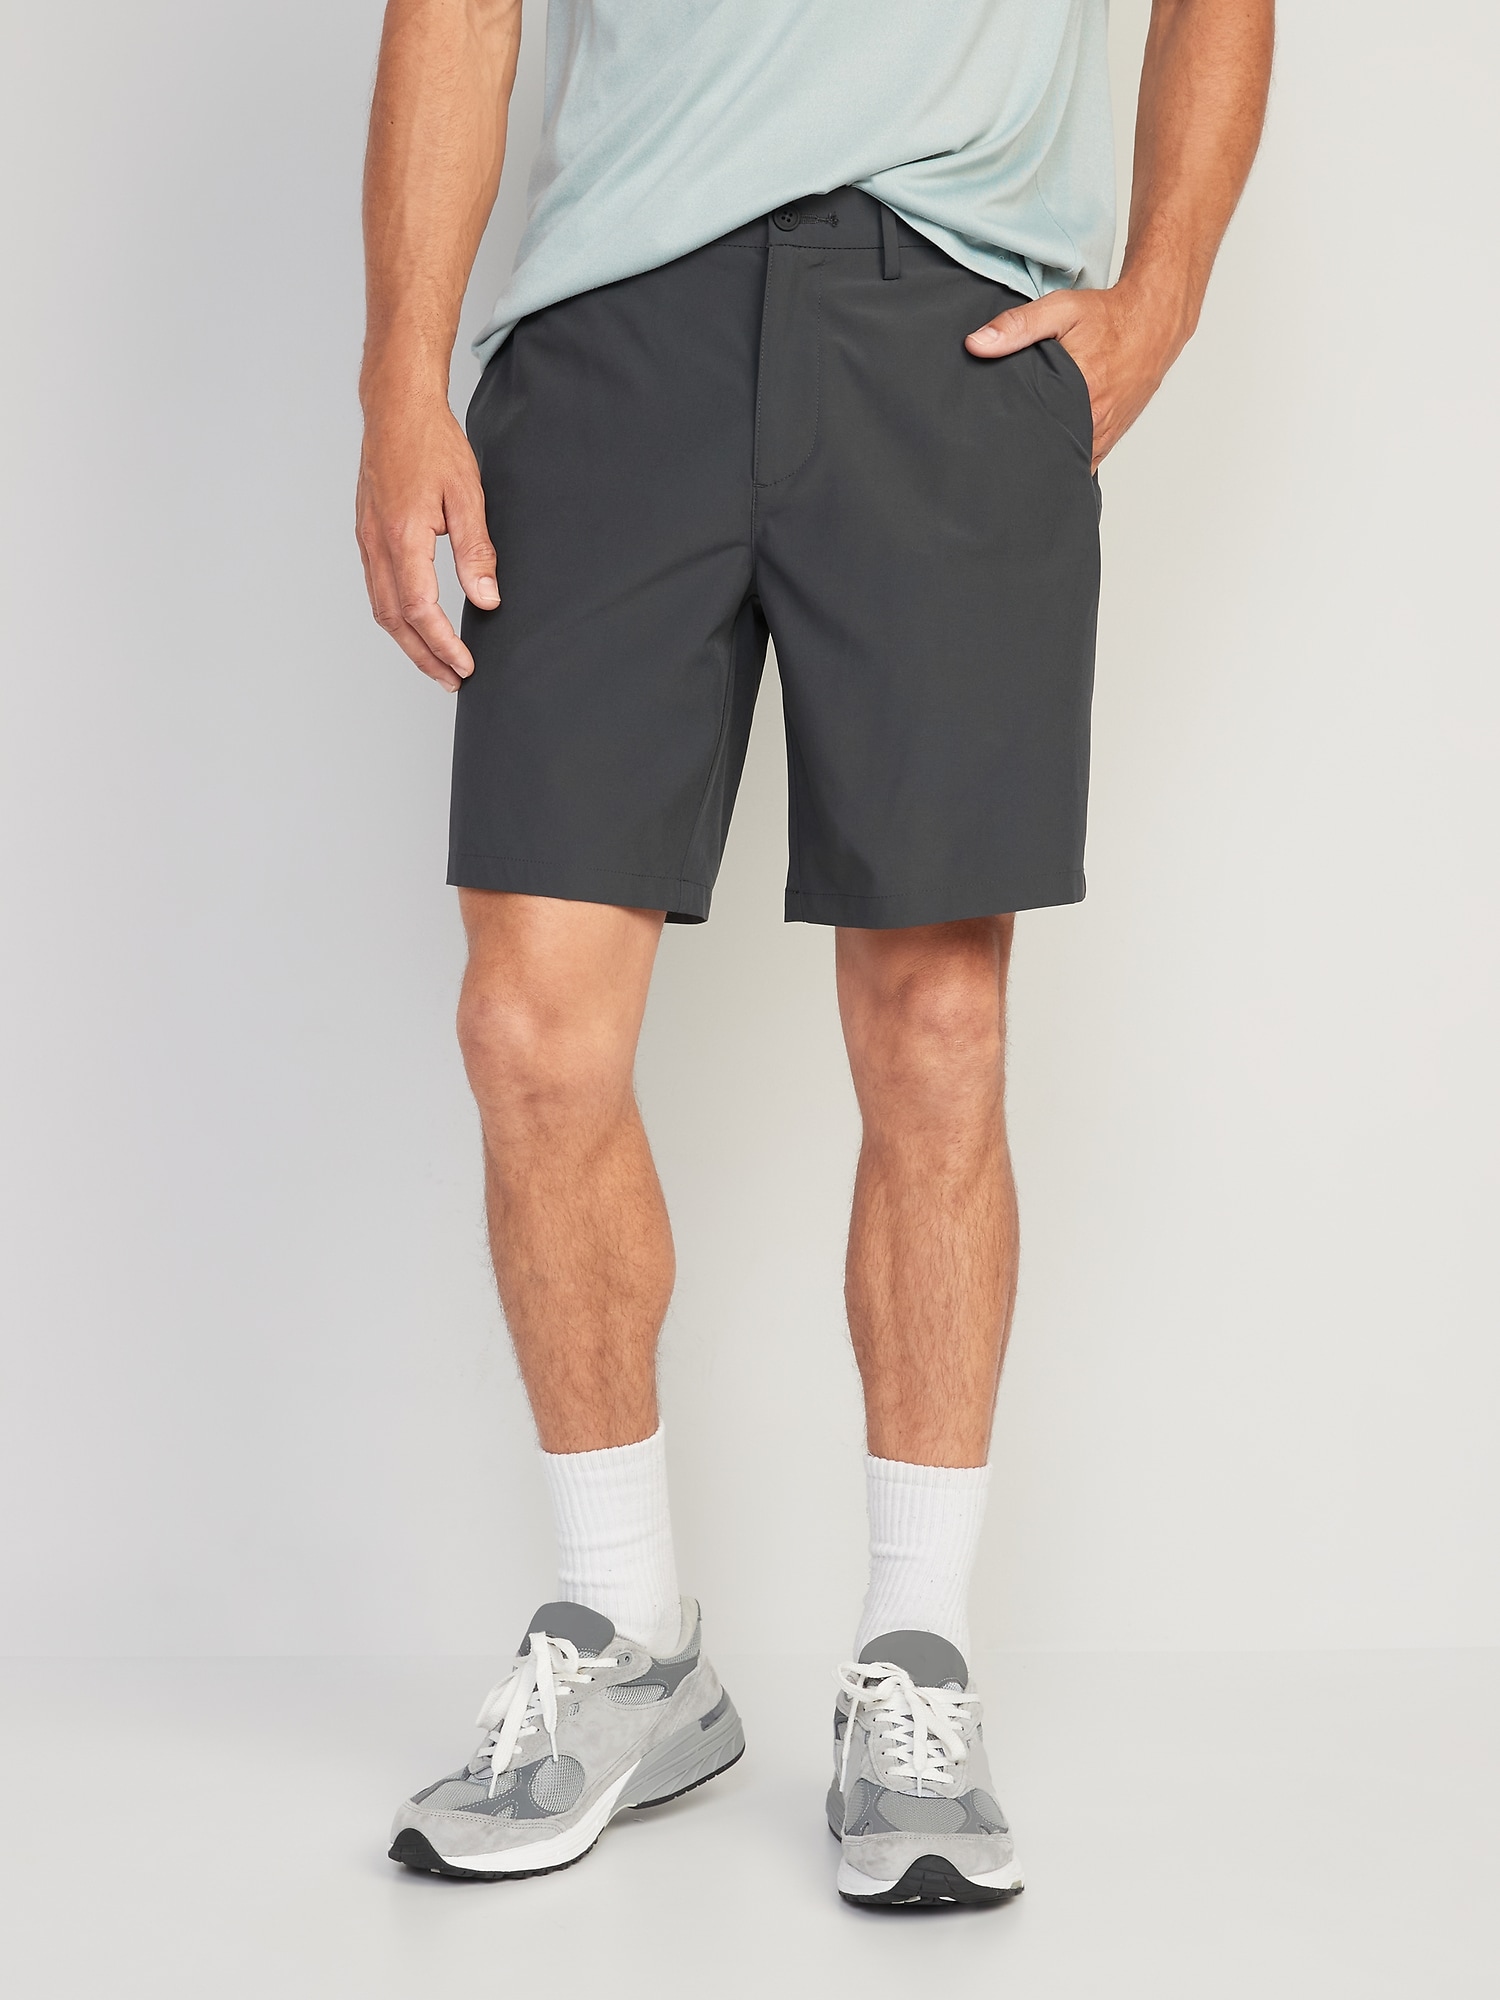 chinos shorts for men